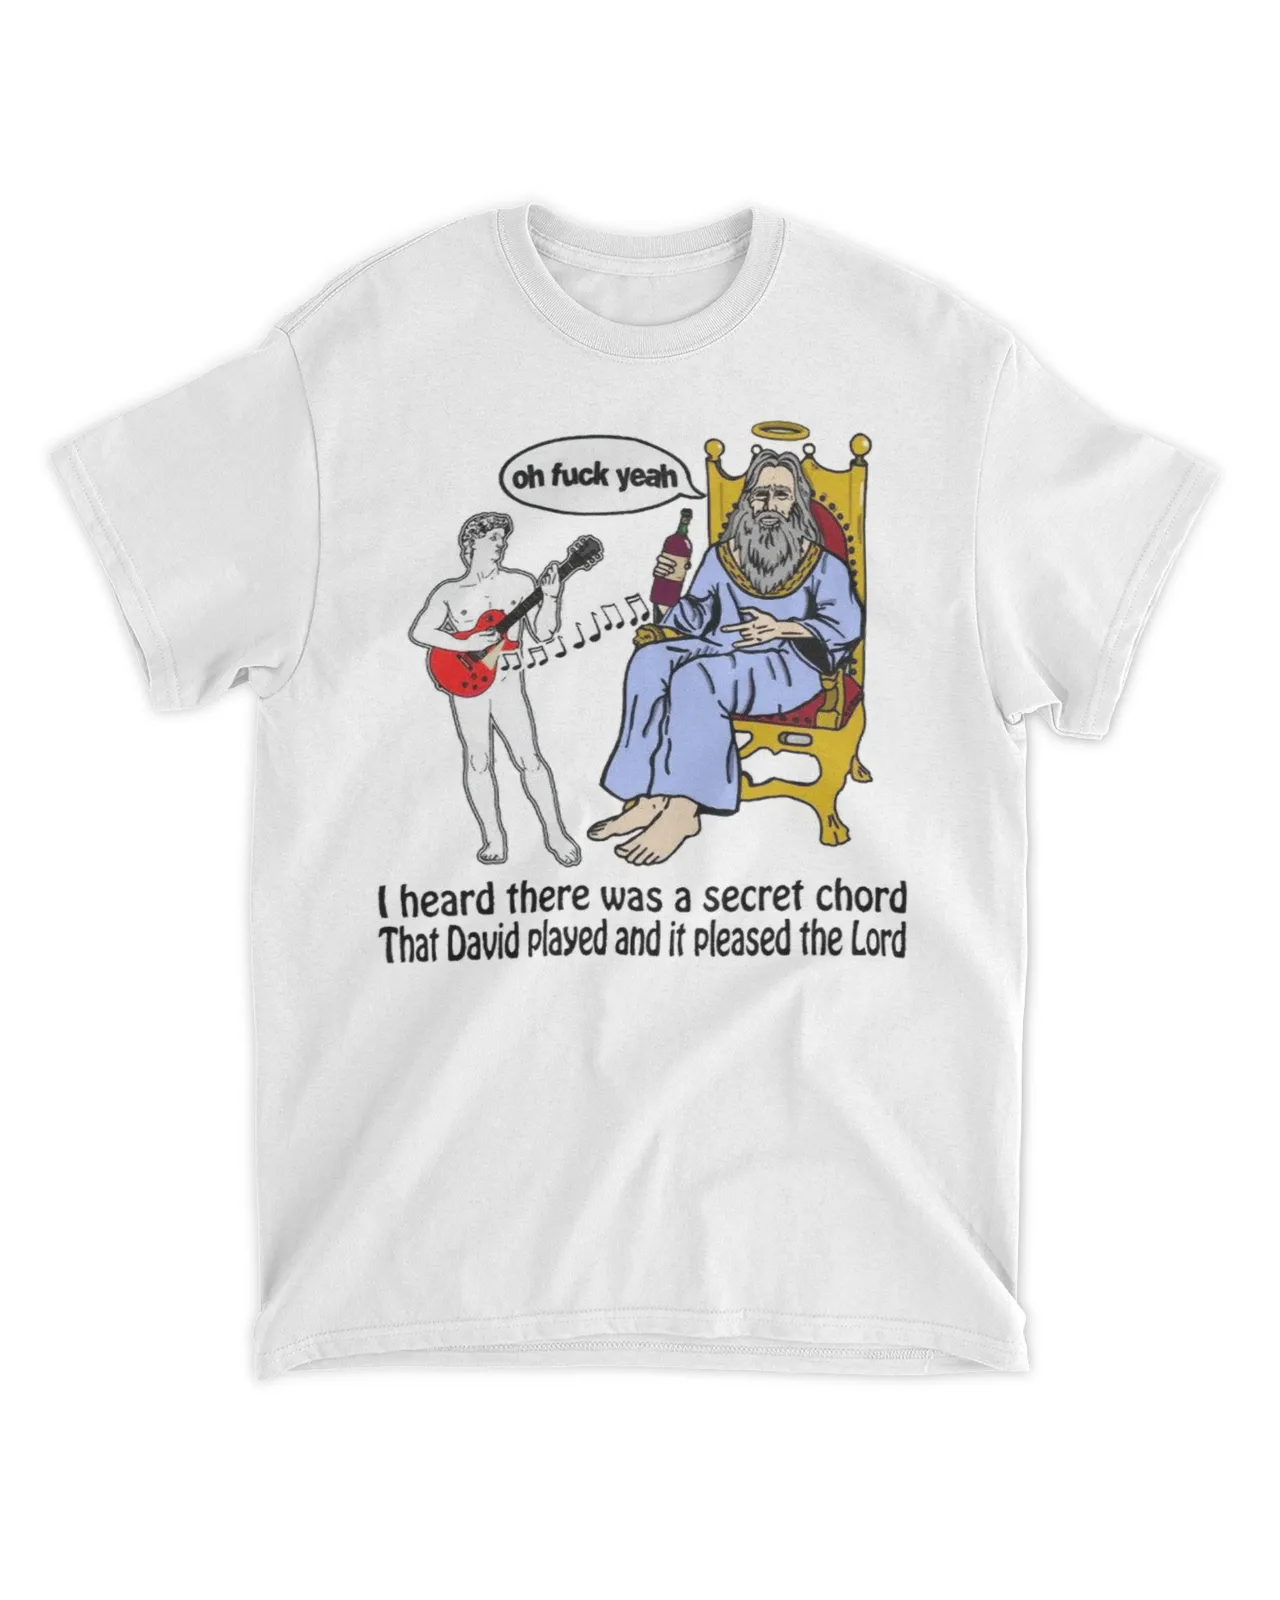  I heard there was a secret chord that David played and it pleased the lord shirt